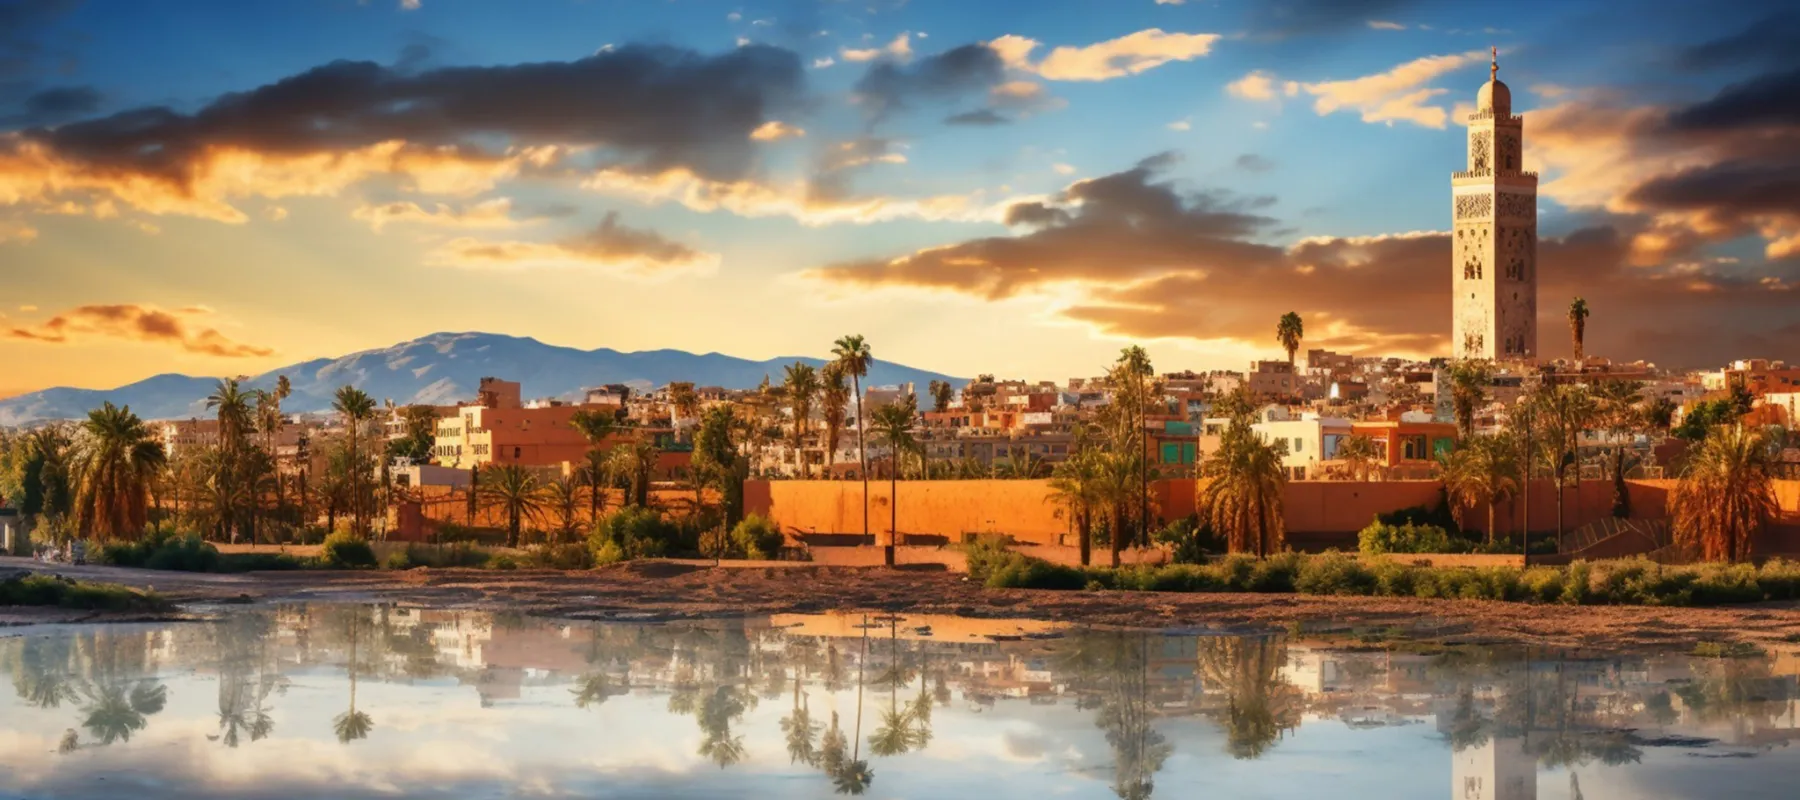 Marrakech, Magic of Morocco Walk, Guided by Nature